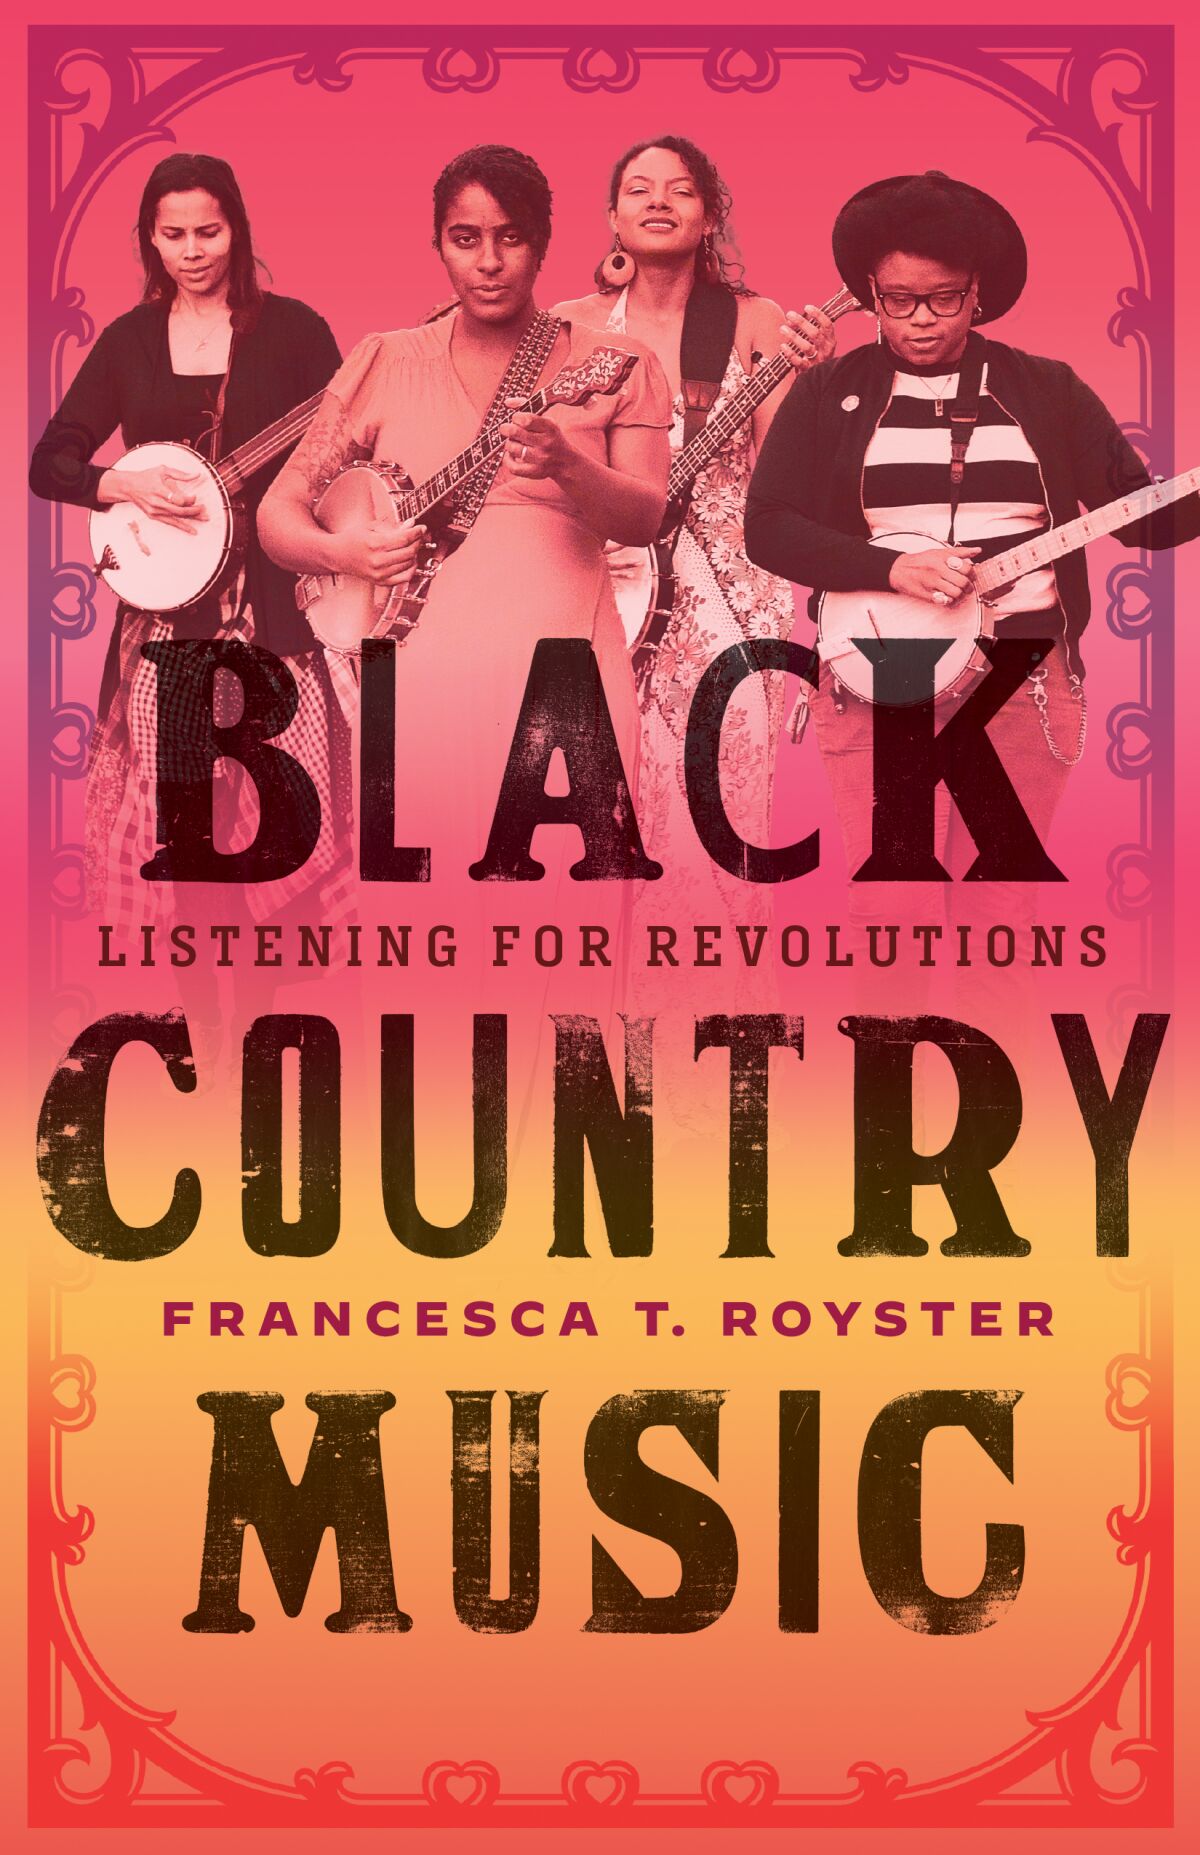 The cover of "Black Country Music: Listening for Revolutions" 